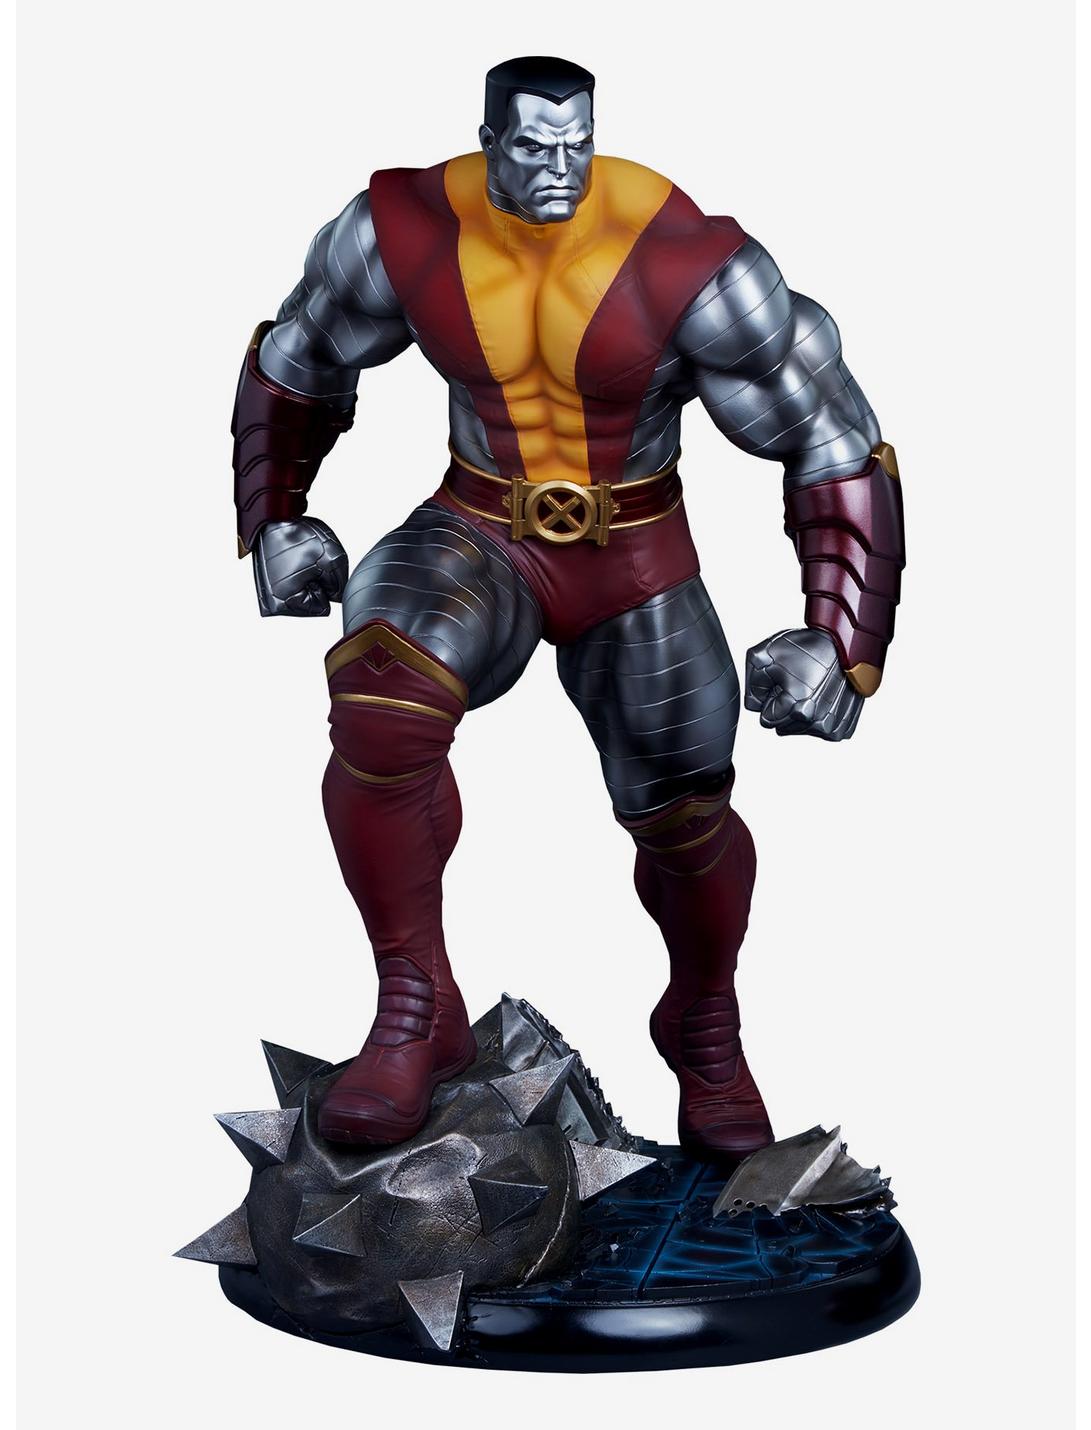 Marvel Colossus Premium Format Figure by Sideshow Collectibles